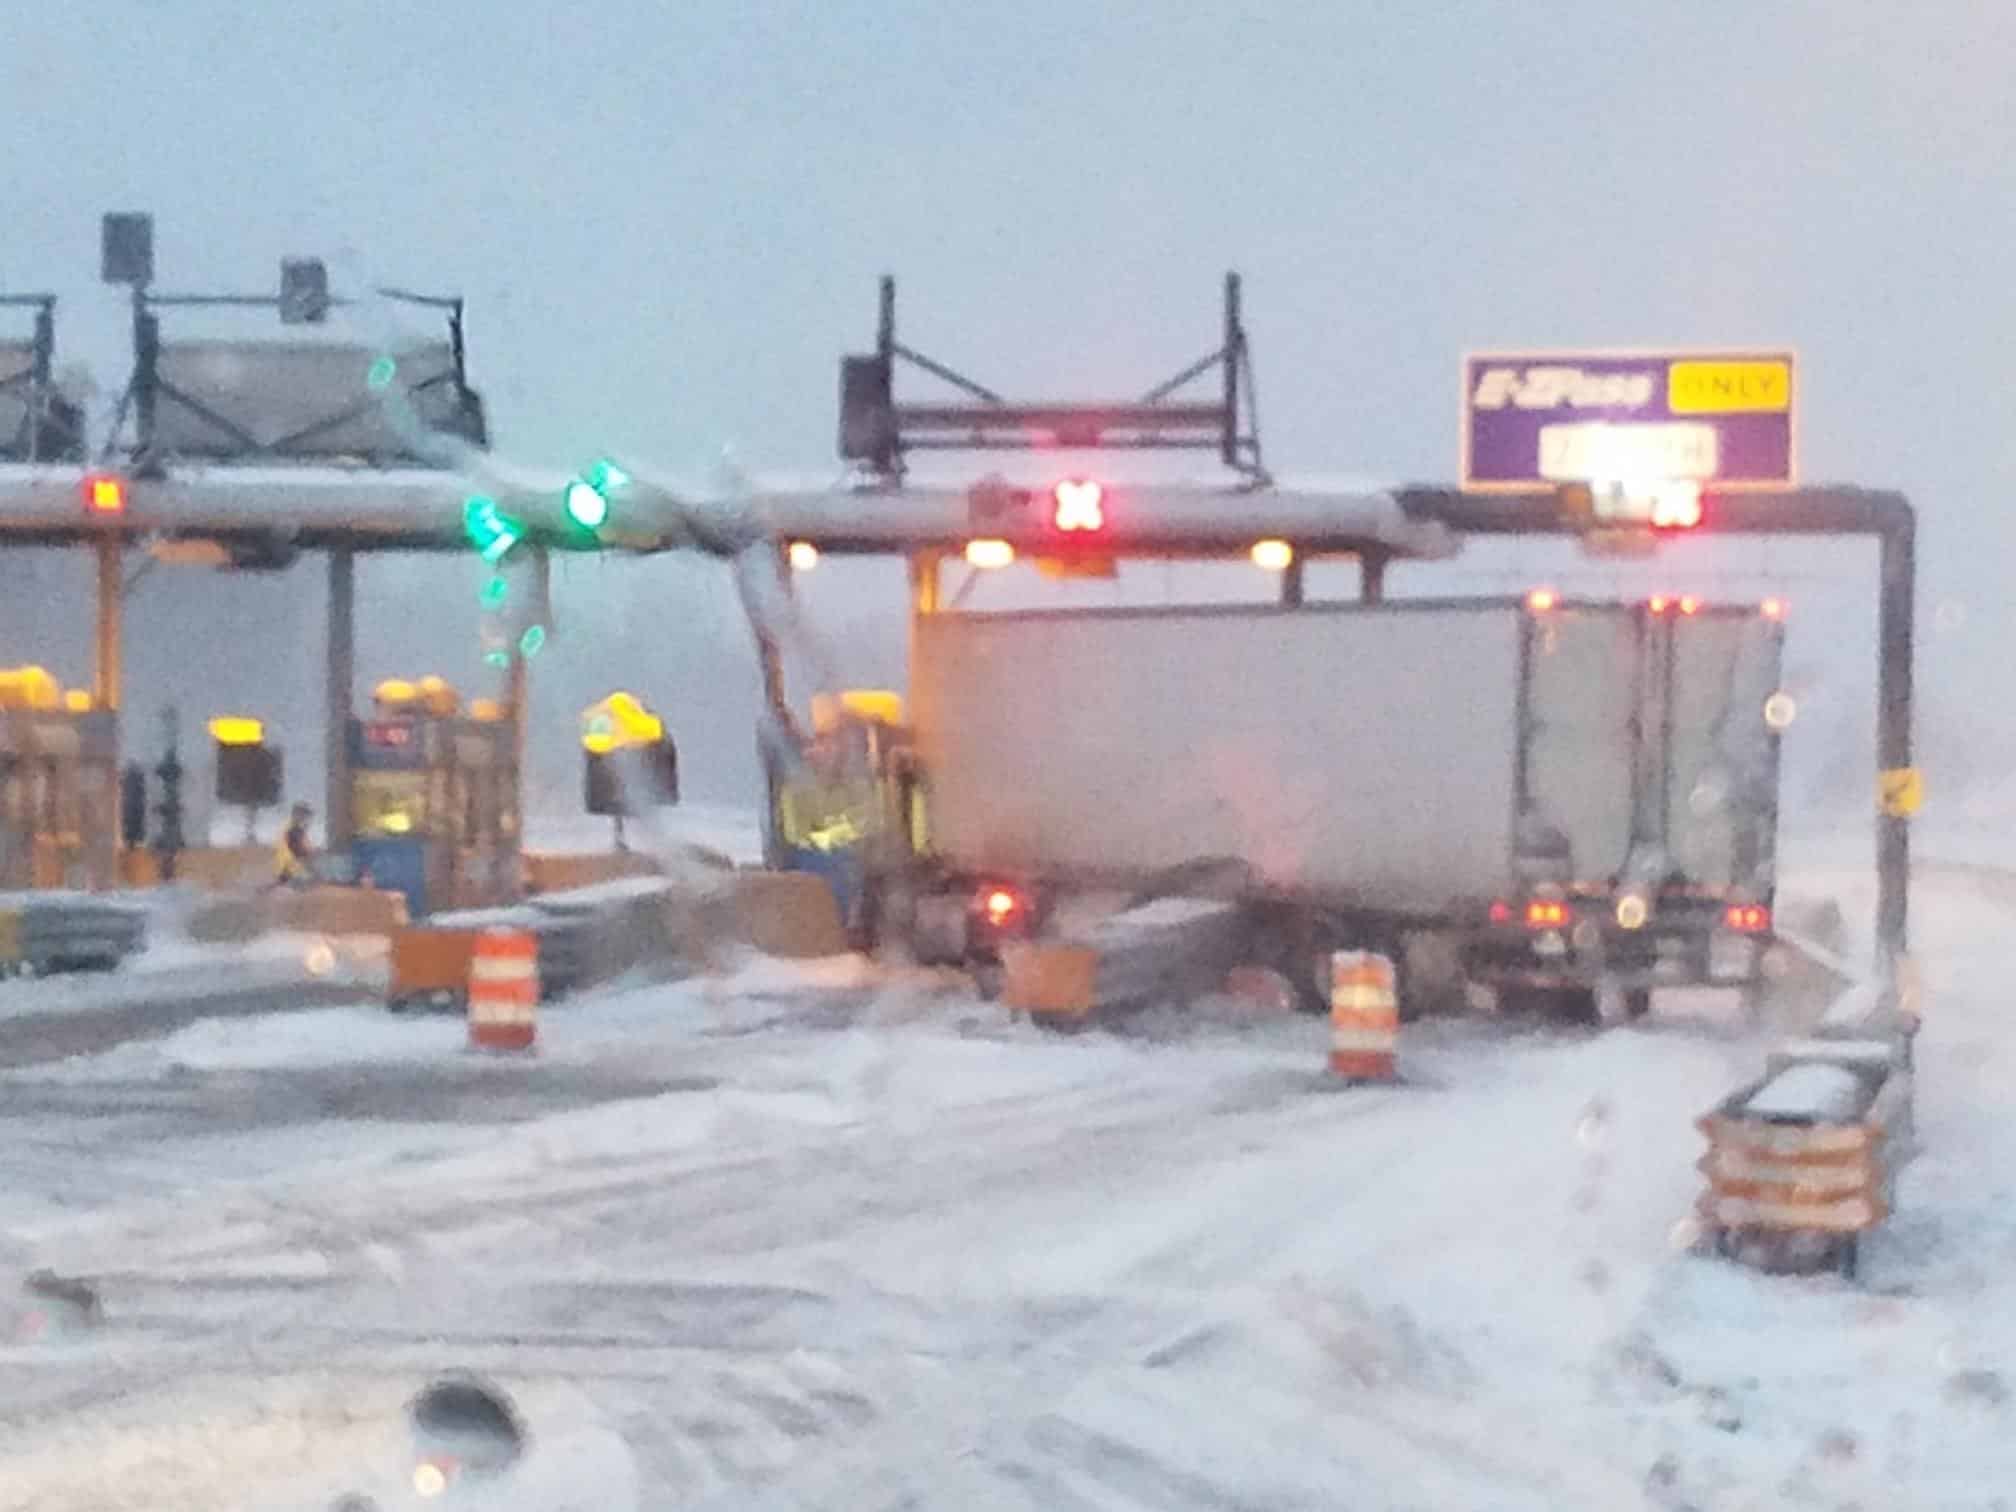 Accident has Thruway Authority asking folks to slow down near toll barriers.